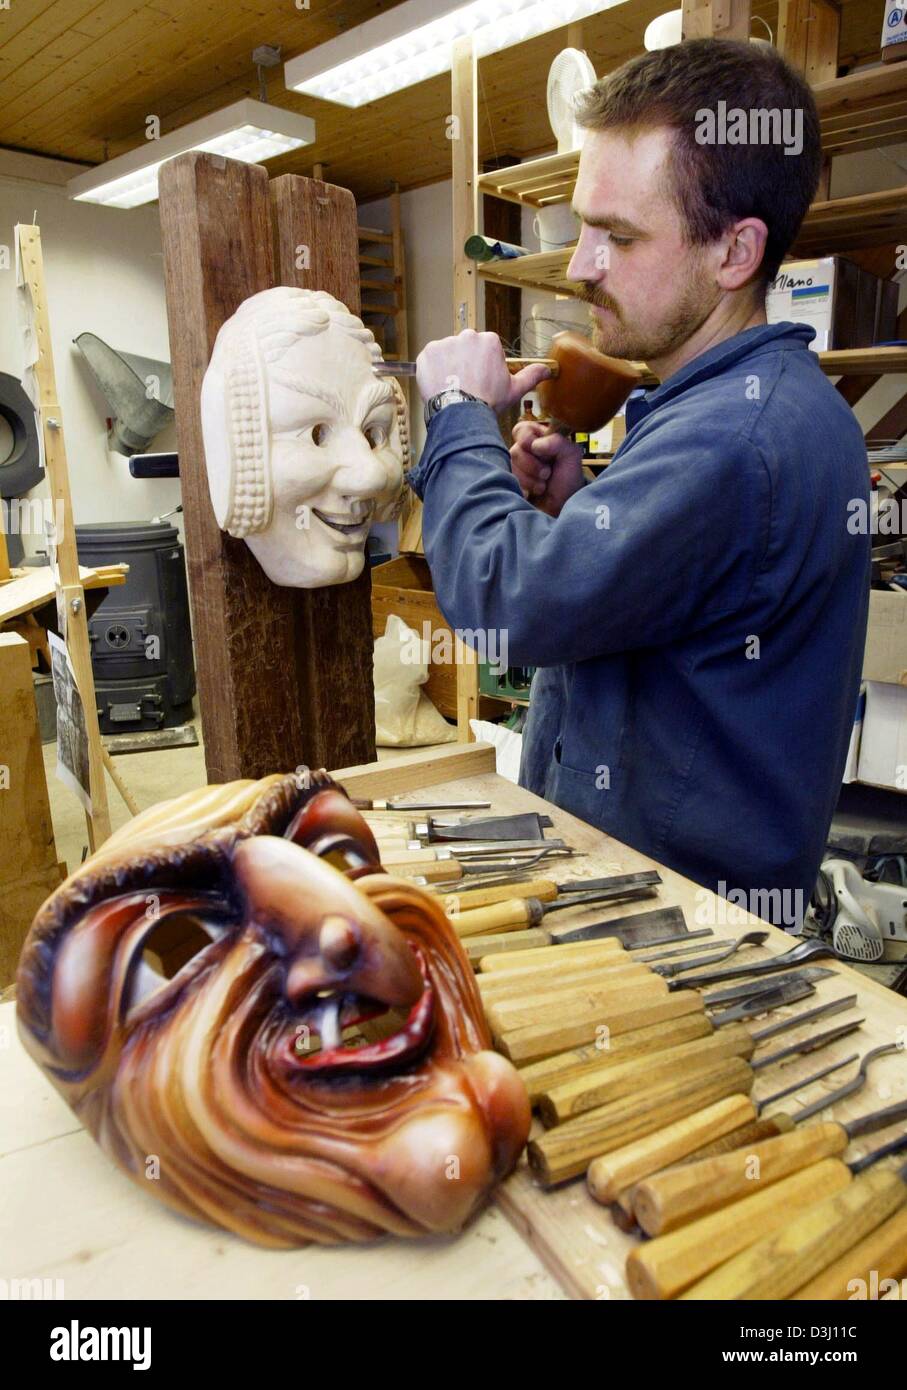 (dpa) - Carver Bernhard Ehmer works on a wooden carnival mask in his workshop in Herxheim, Germany, 2 February 2004. The wooden masks are a tradition of the Alemannic carnival in southwestern Germany. Stock Photo